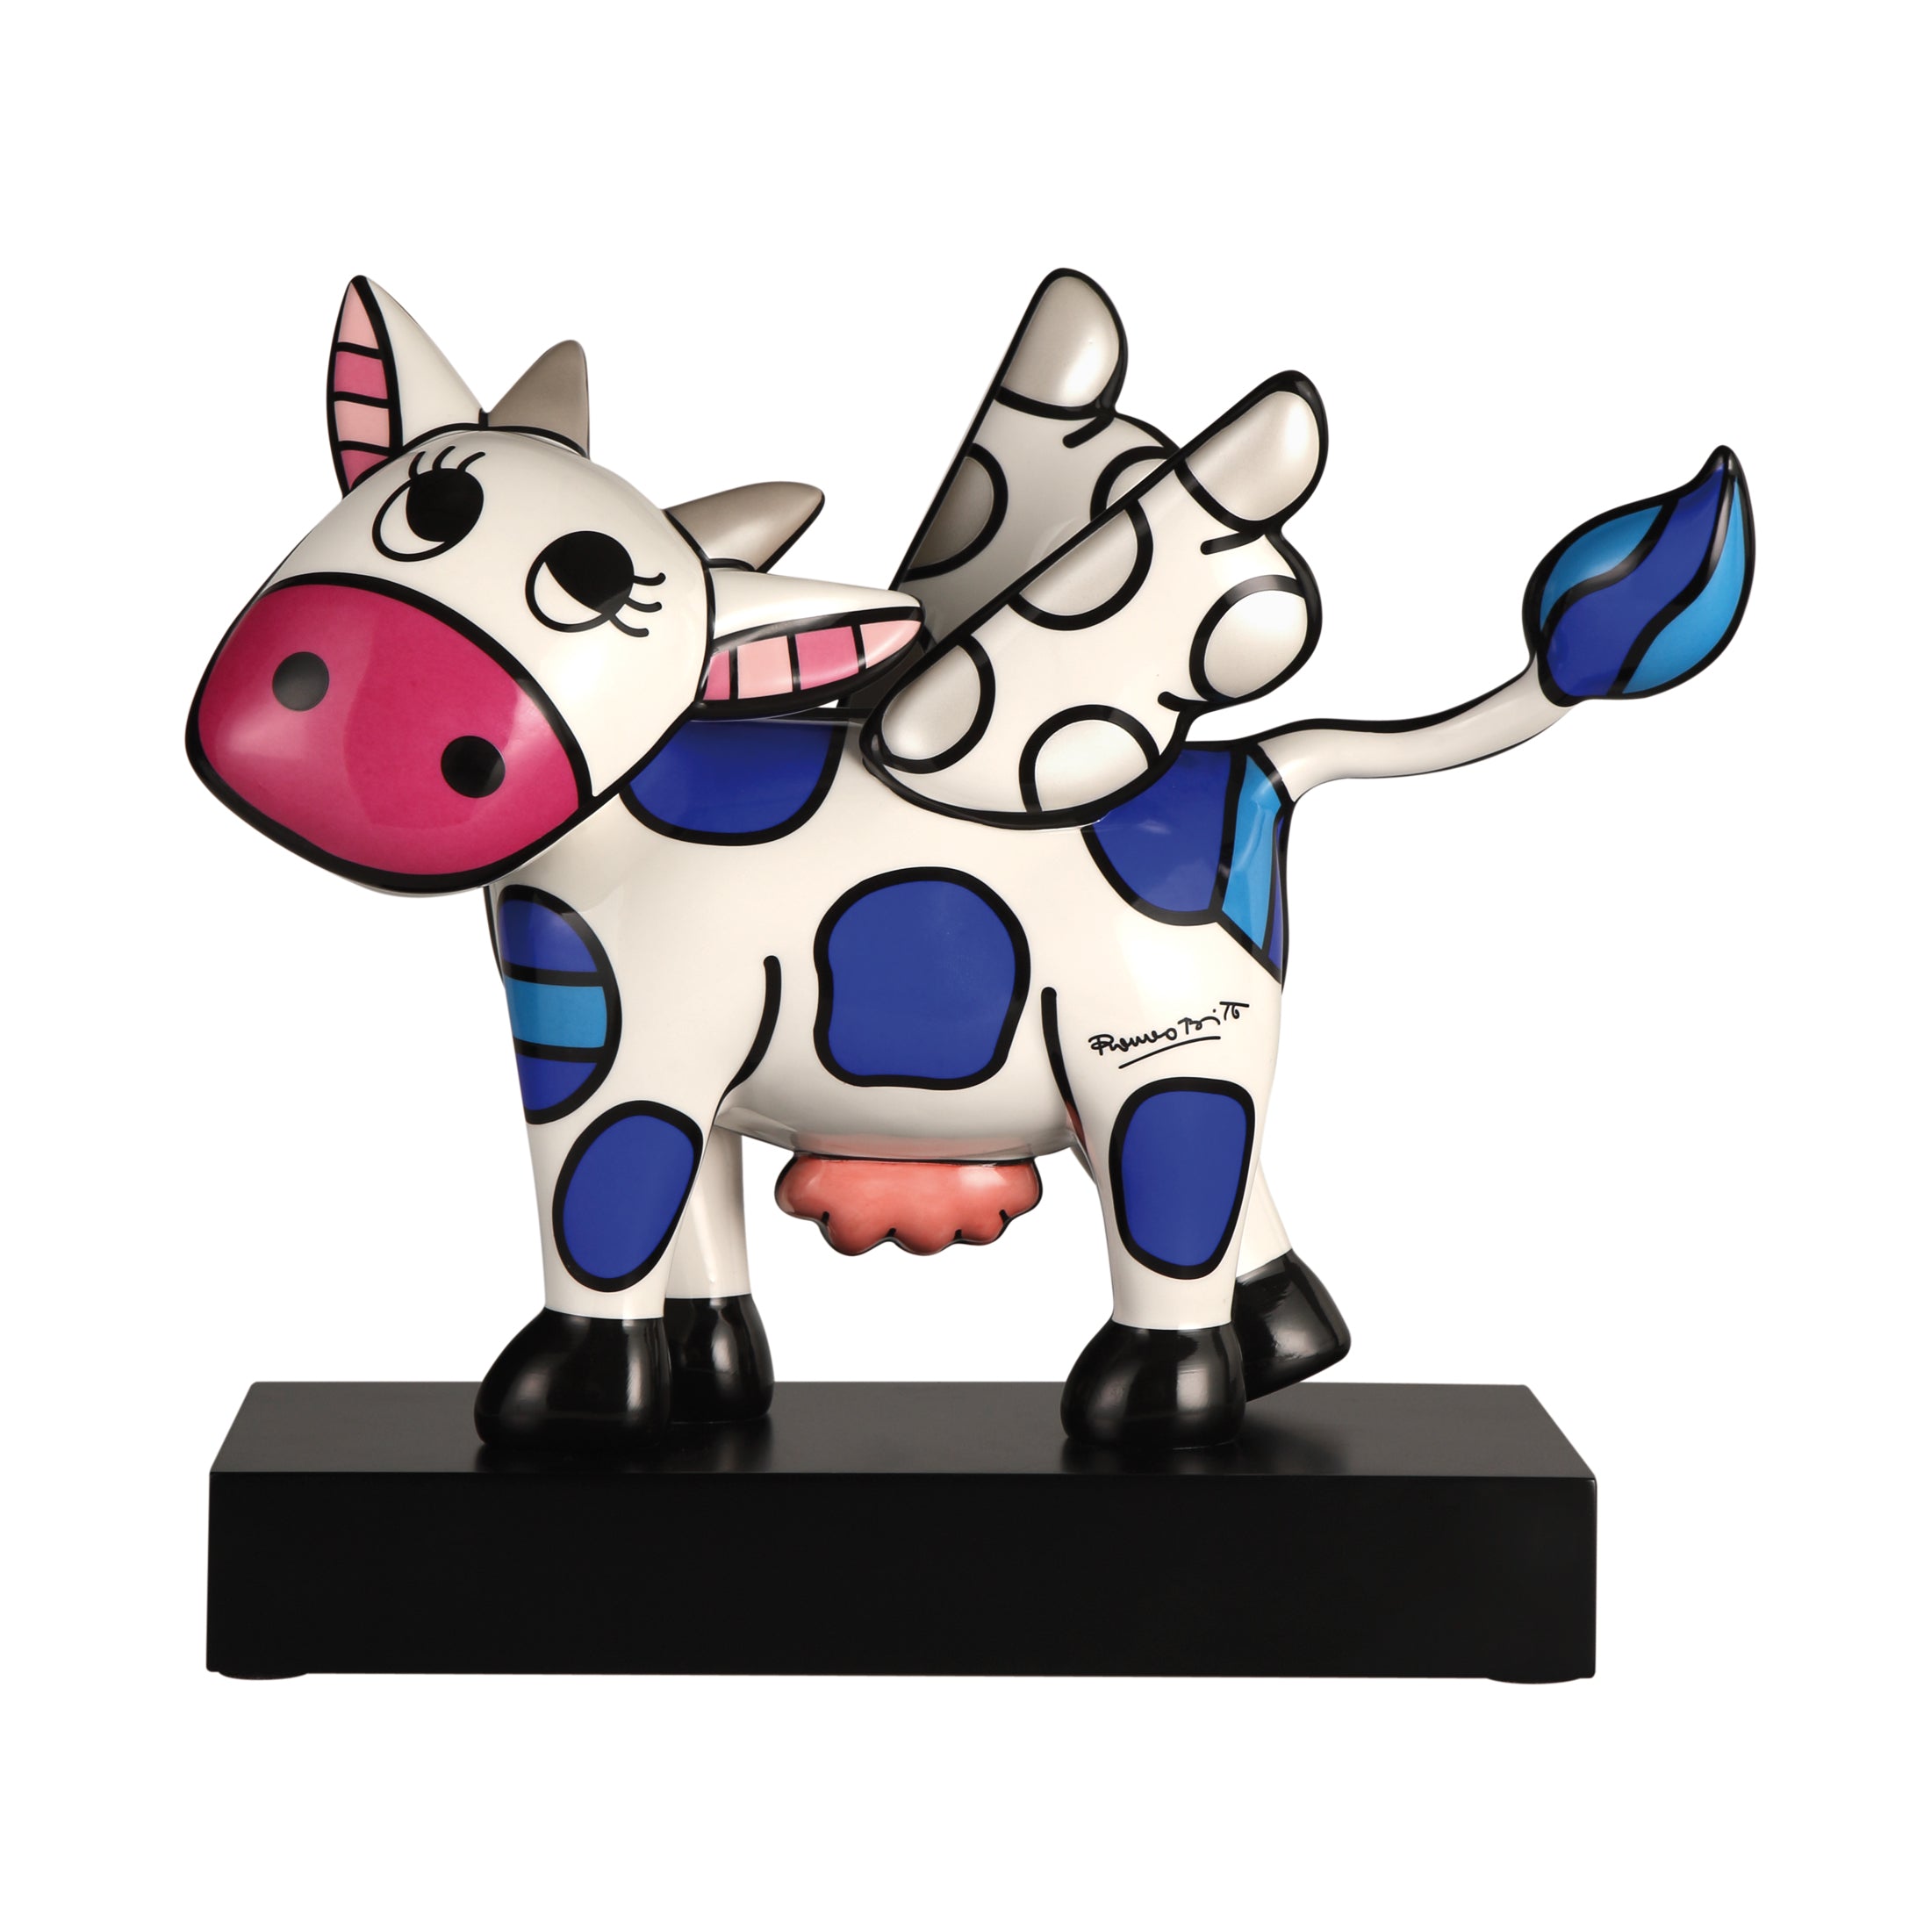 Goebel-by-Britto-Figur-Flying-Cow-limited-edition-berlindeluxe-kuh-blau-punkte